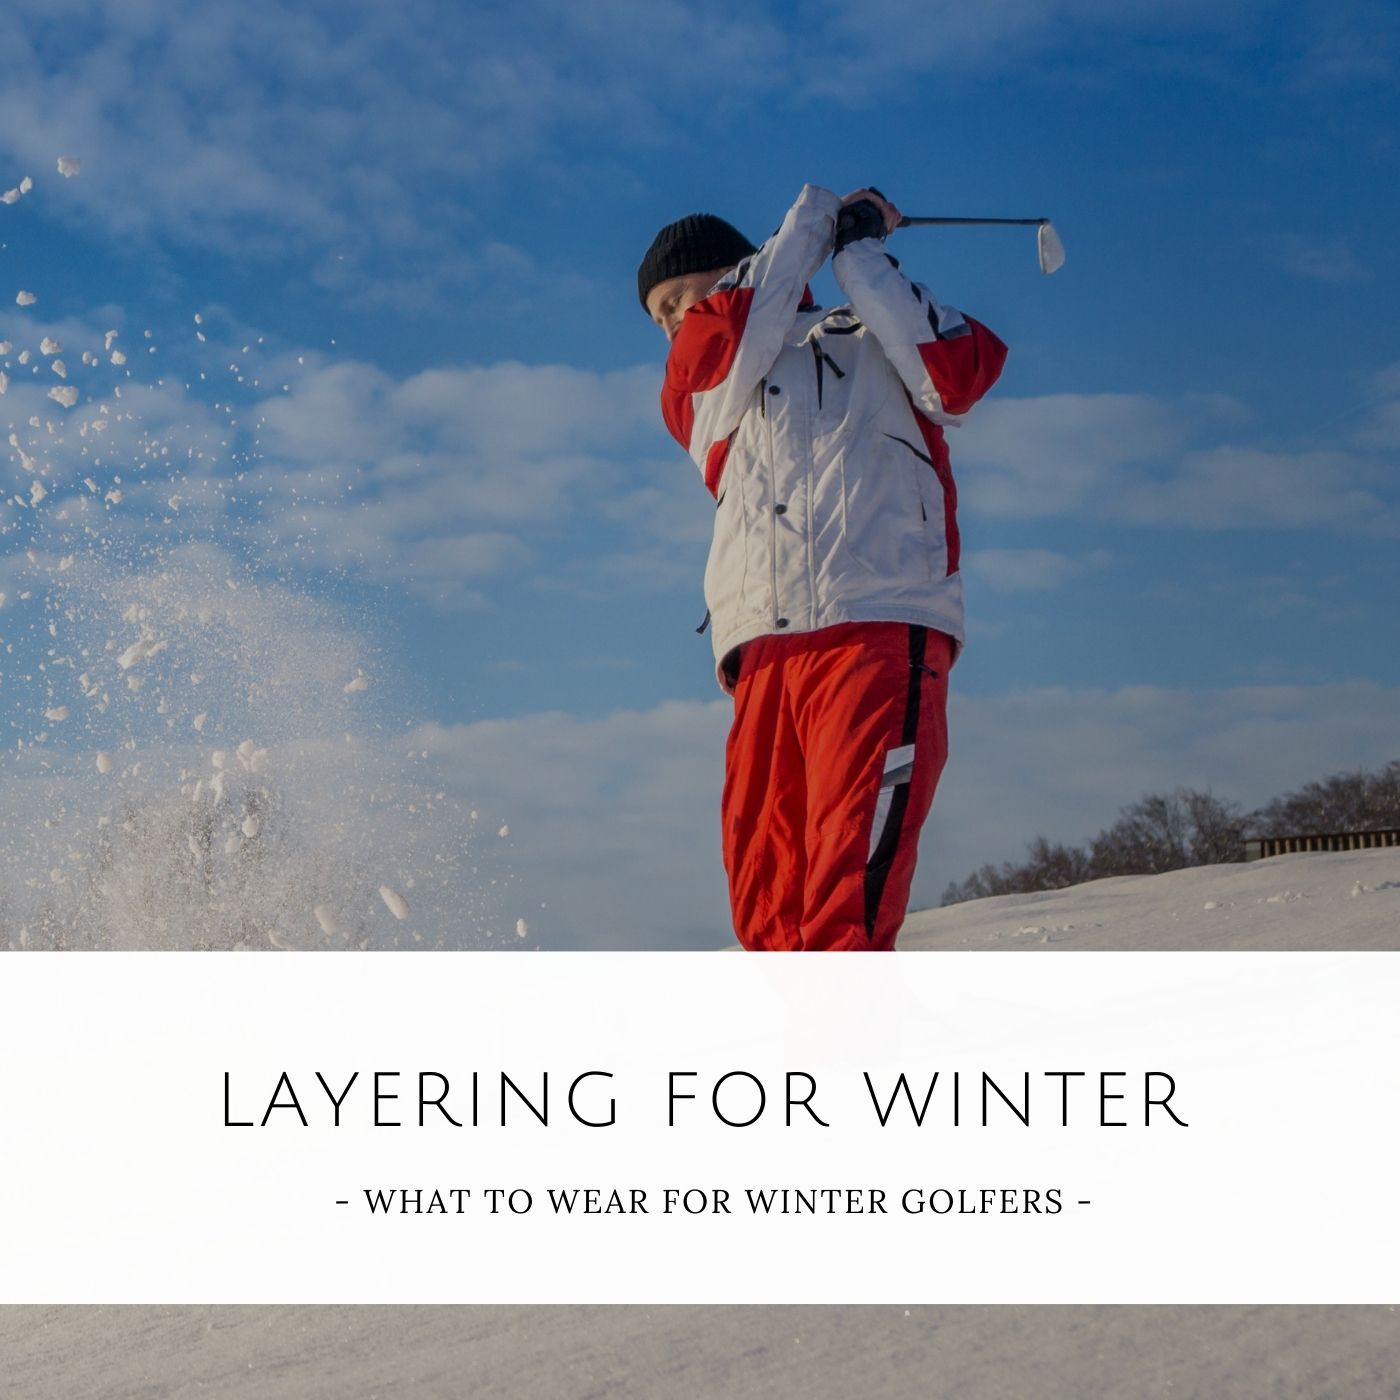 Winter Wear: Layers for Winter Players